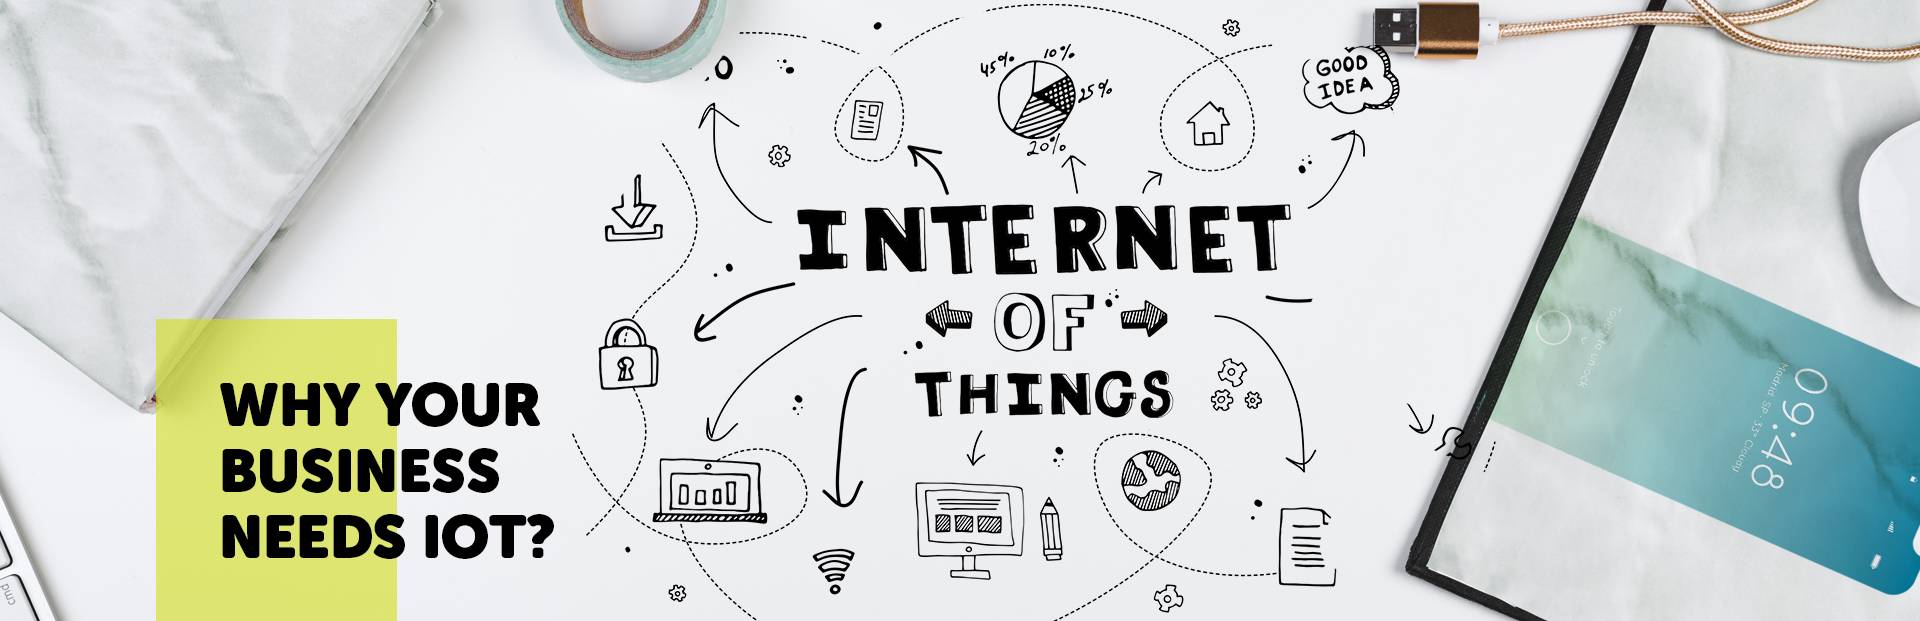 Why are we using IoT, and how is it helping our business?